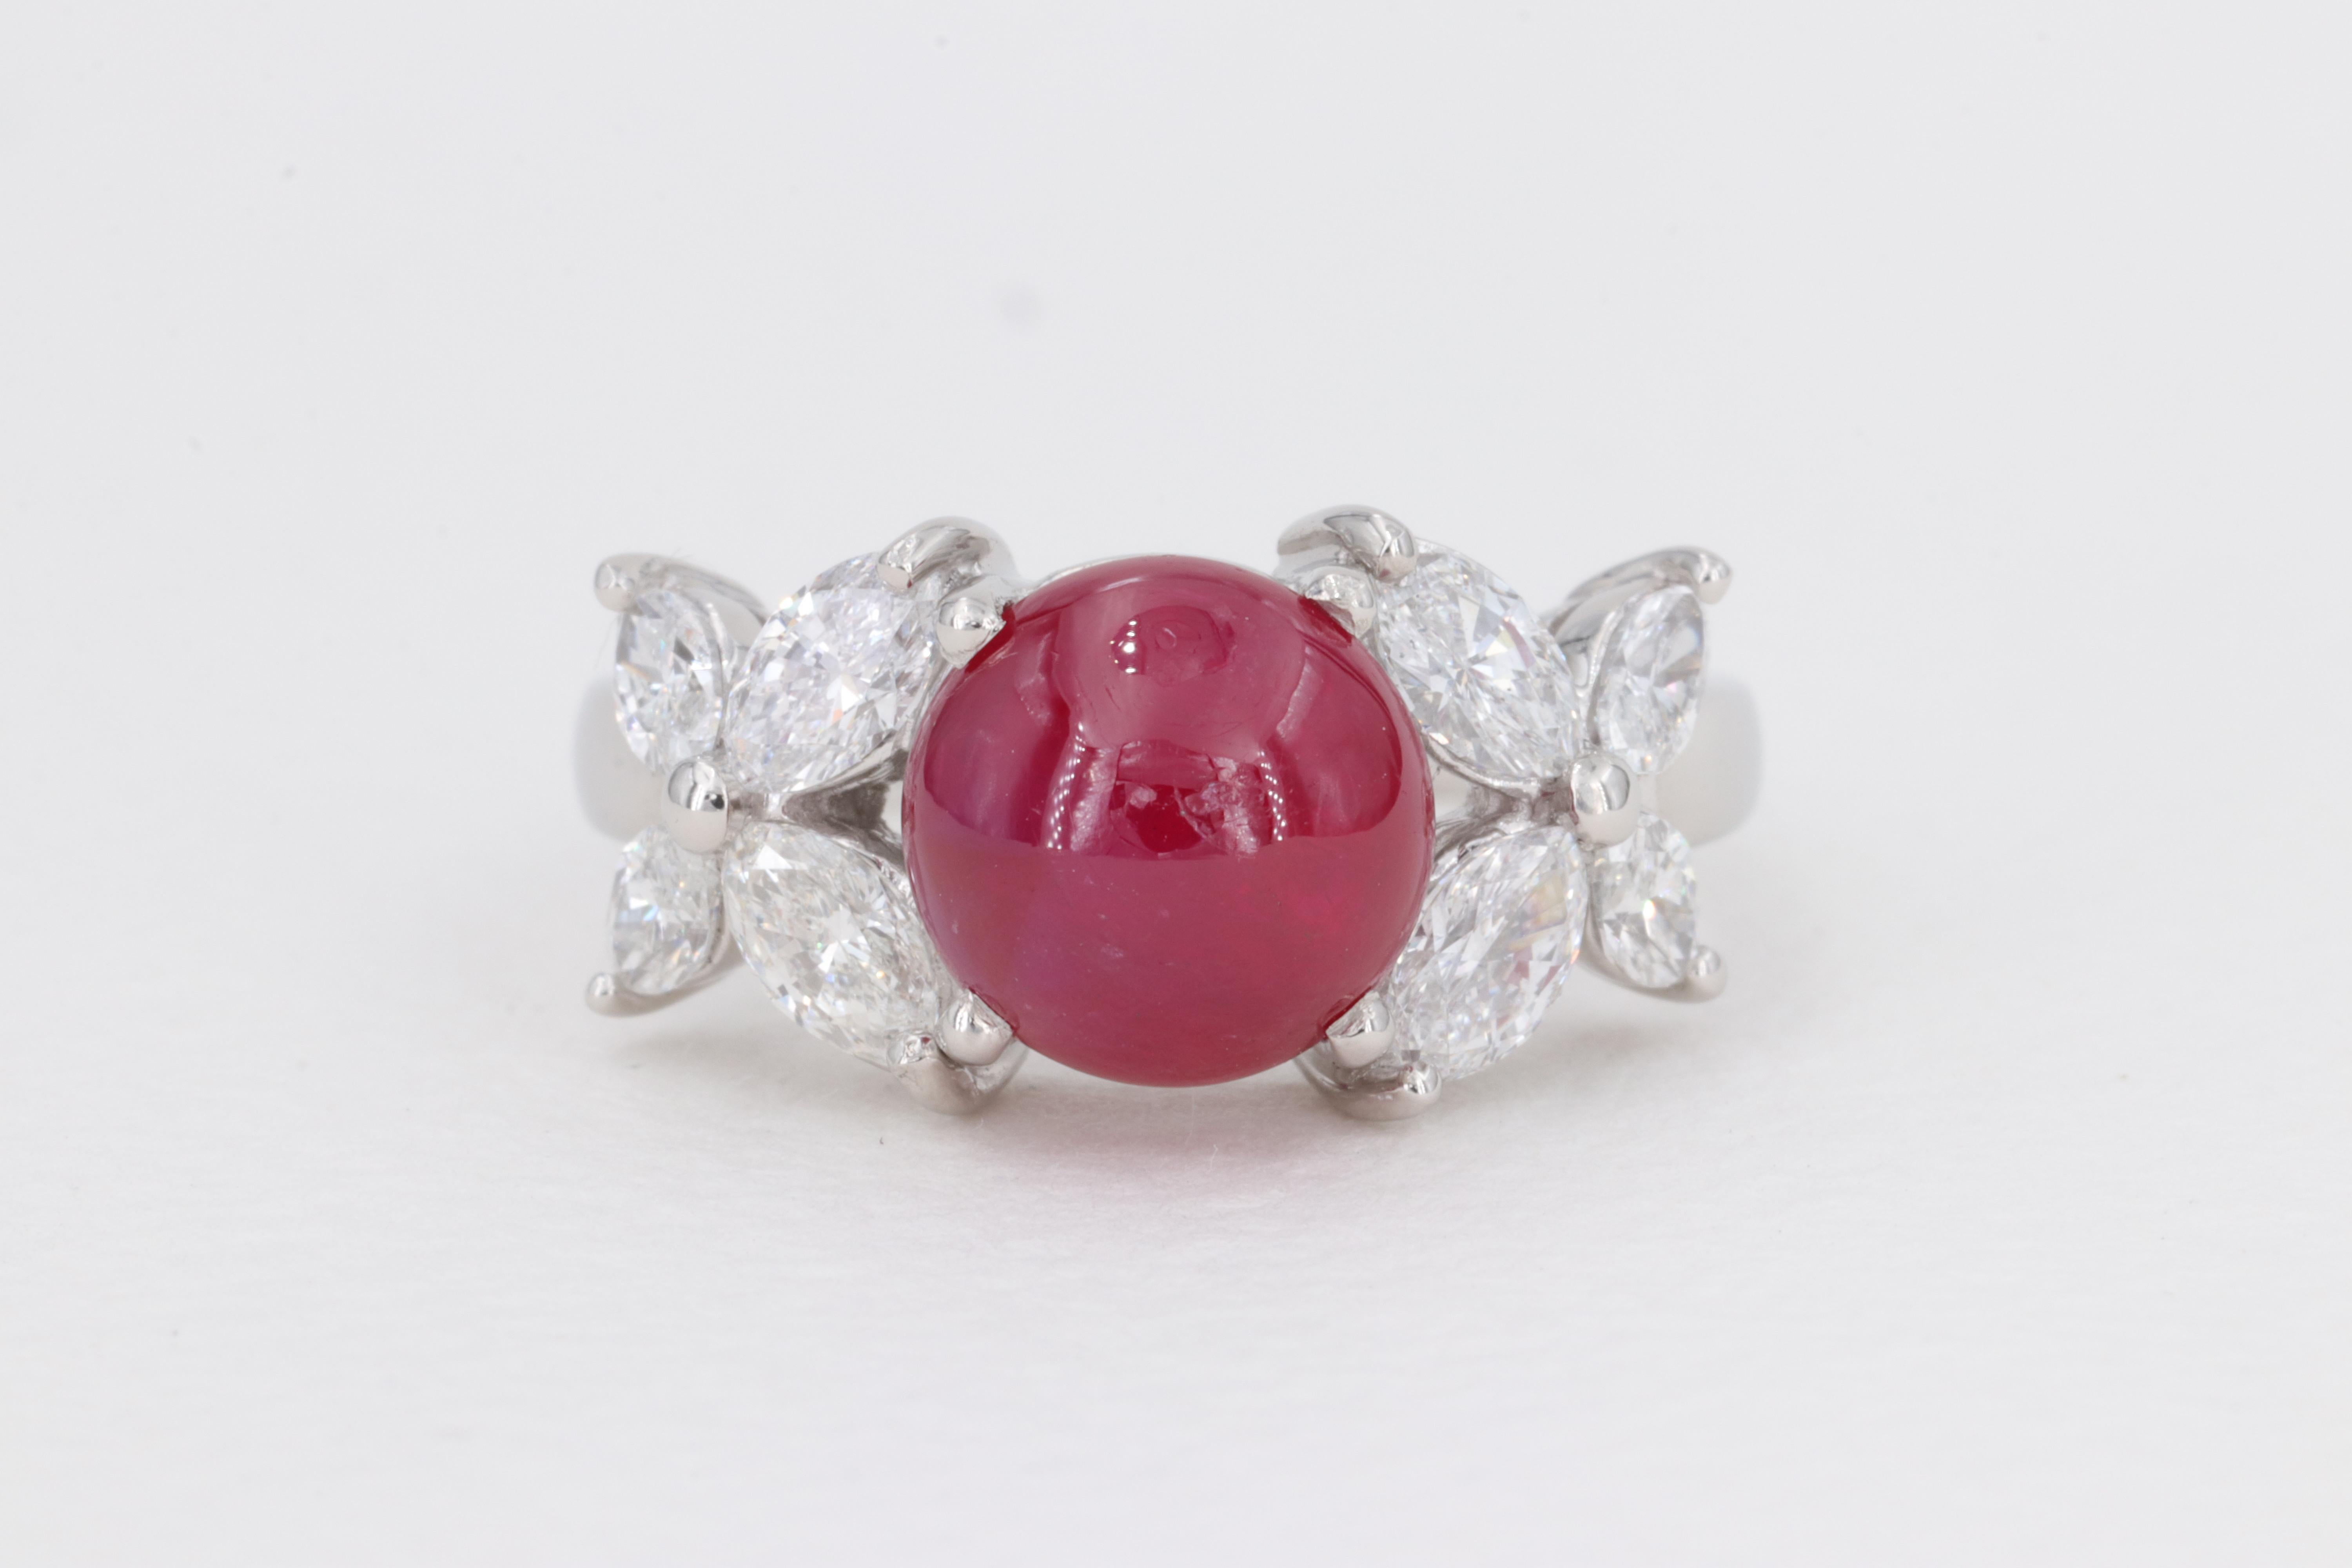 No Heat Cabochon Ruby G.I.A. Set in Plat Ring with Marquise Diamonds

Ruby:

Weight - Approximately 3.39 Carats
Measurements - 8.10 x 8.18 x 4.75
Shape - Cabochon 
Treatment - No Gemological Indications of Treatment
Origin - Afghanistan 
G.I.A.